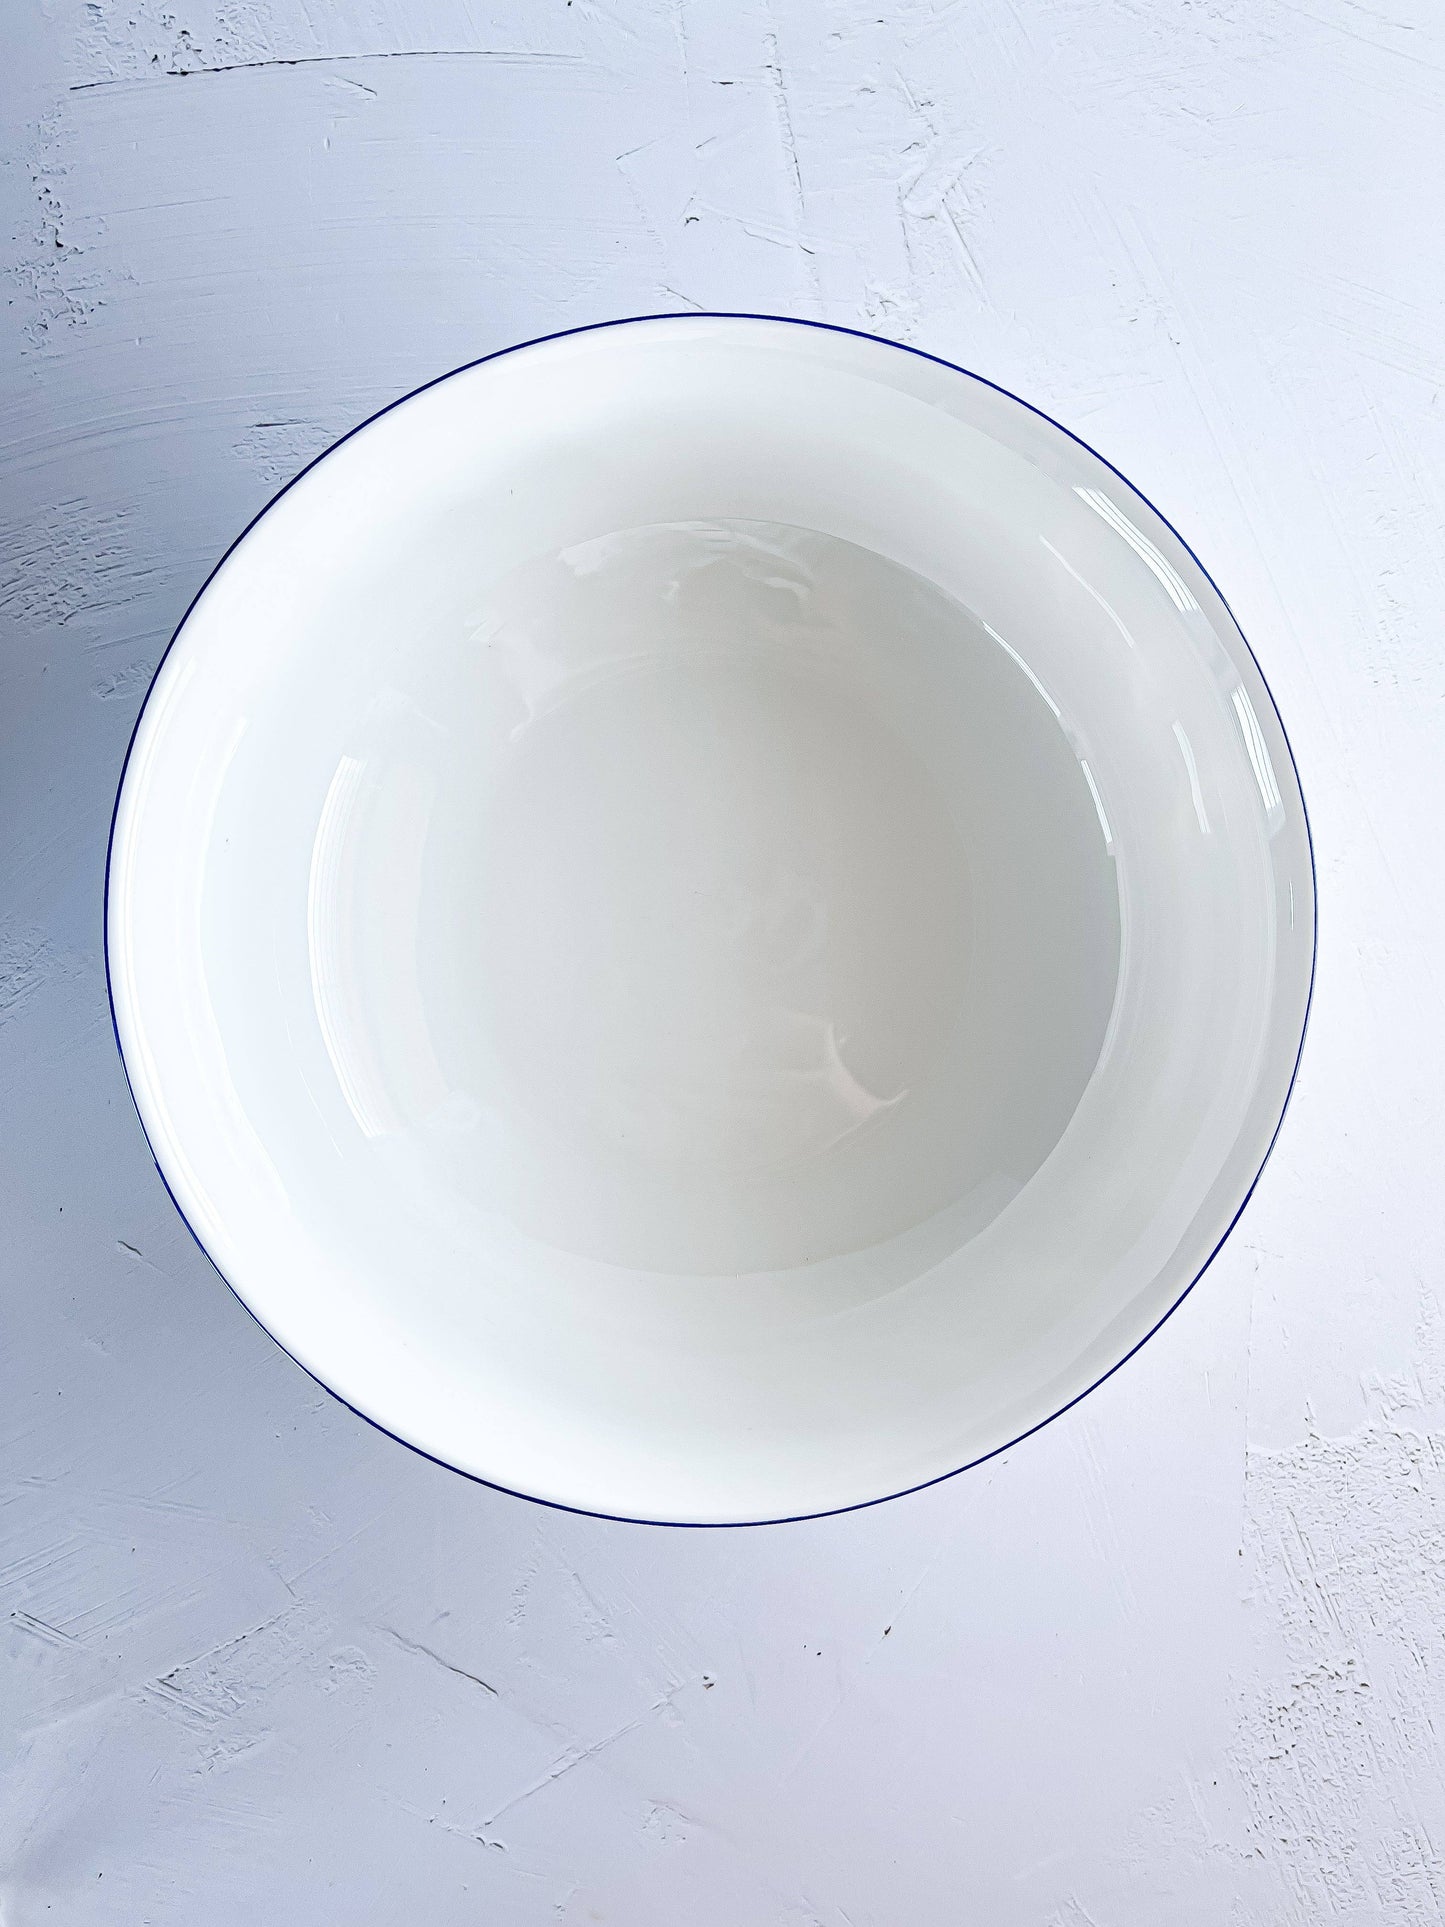 Villeroy & Boch 'Vieux Luxembourg' Large Salad Bowl - SOSC Home